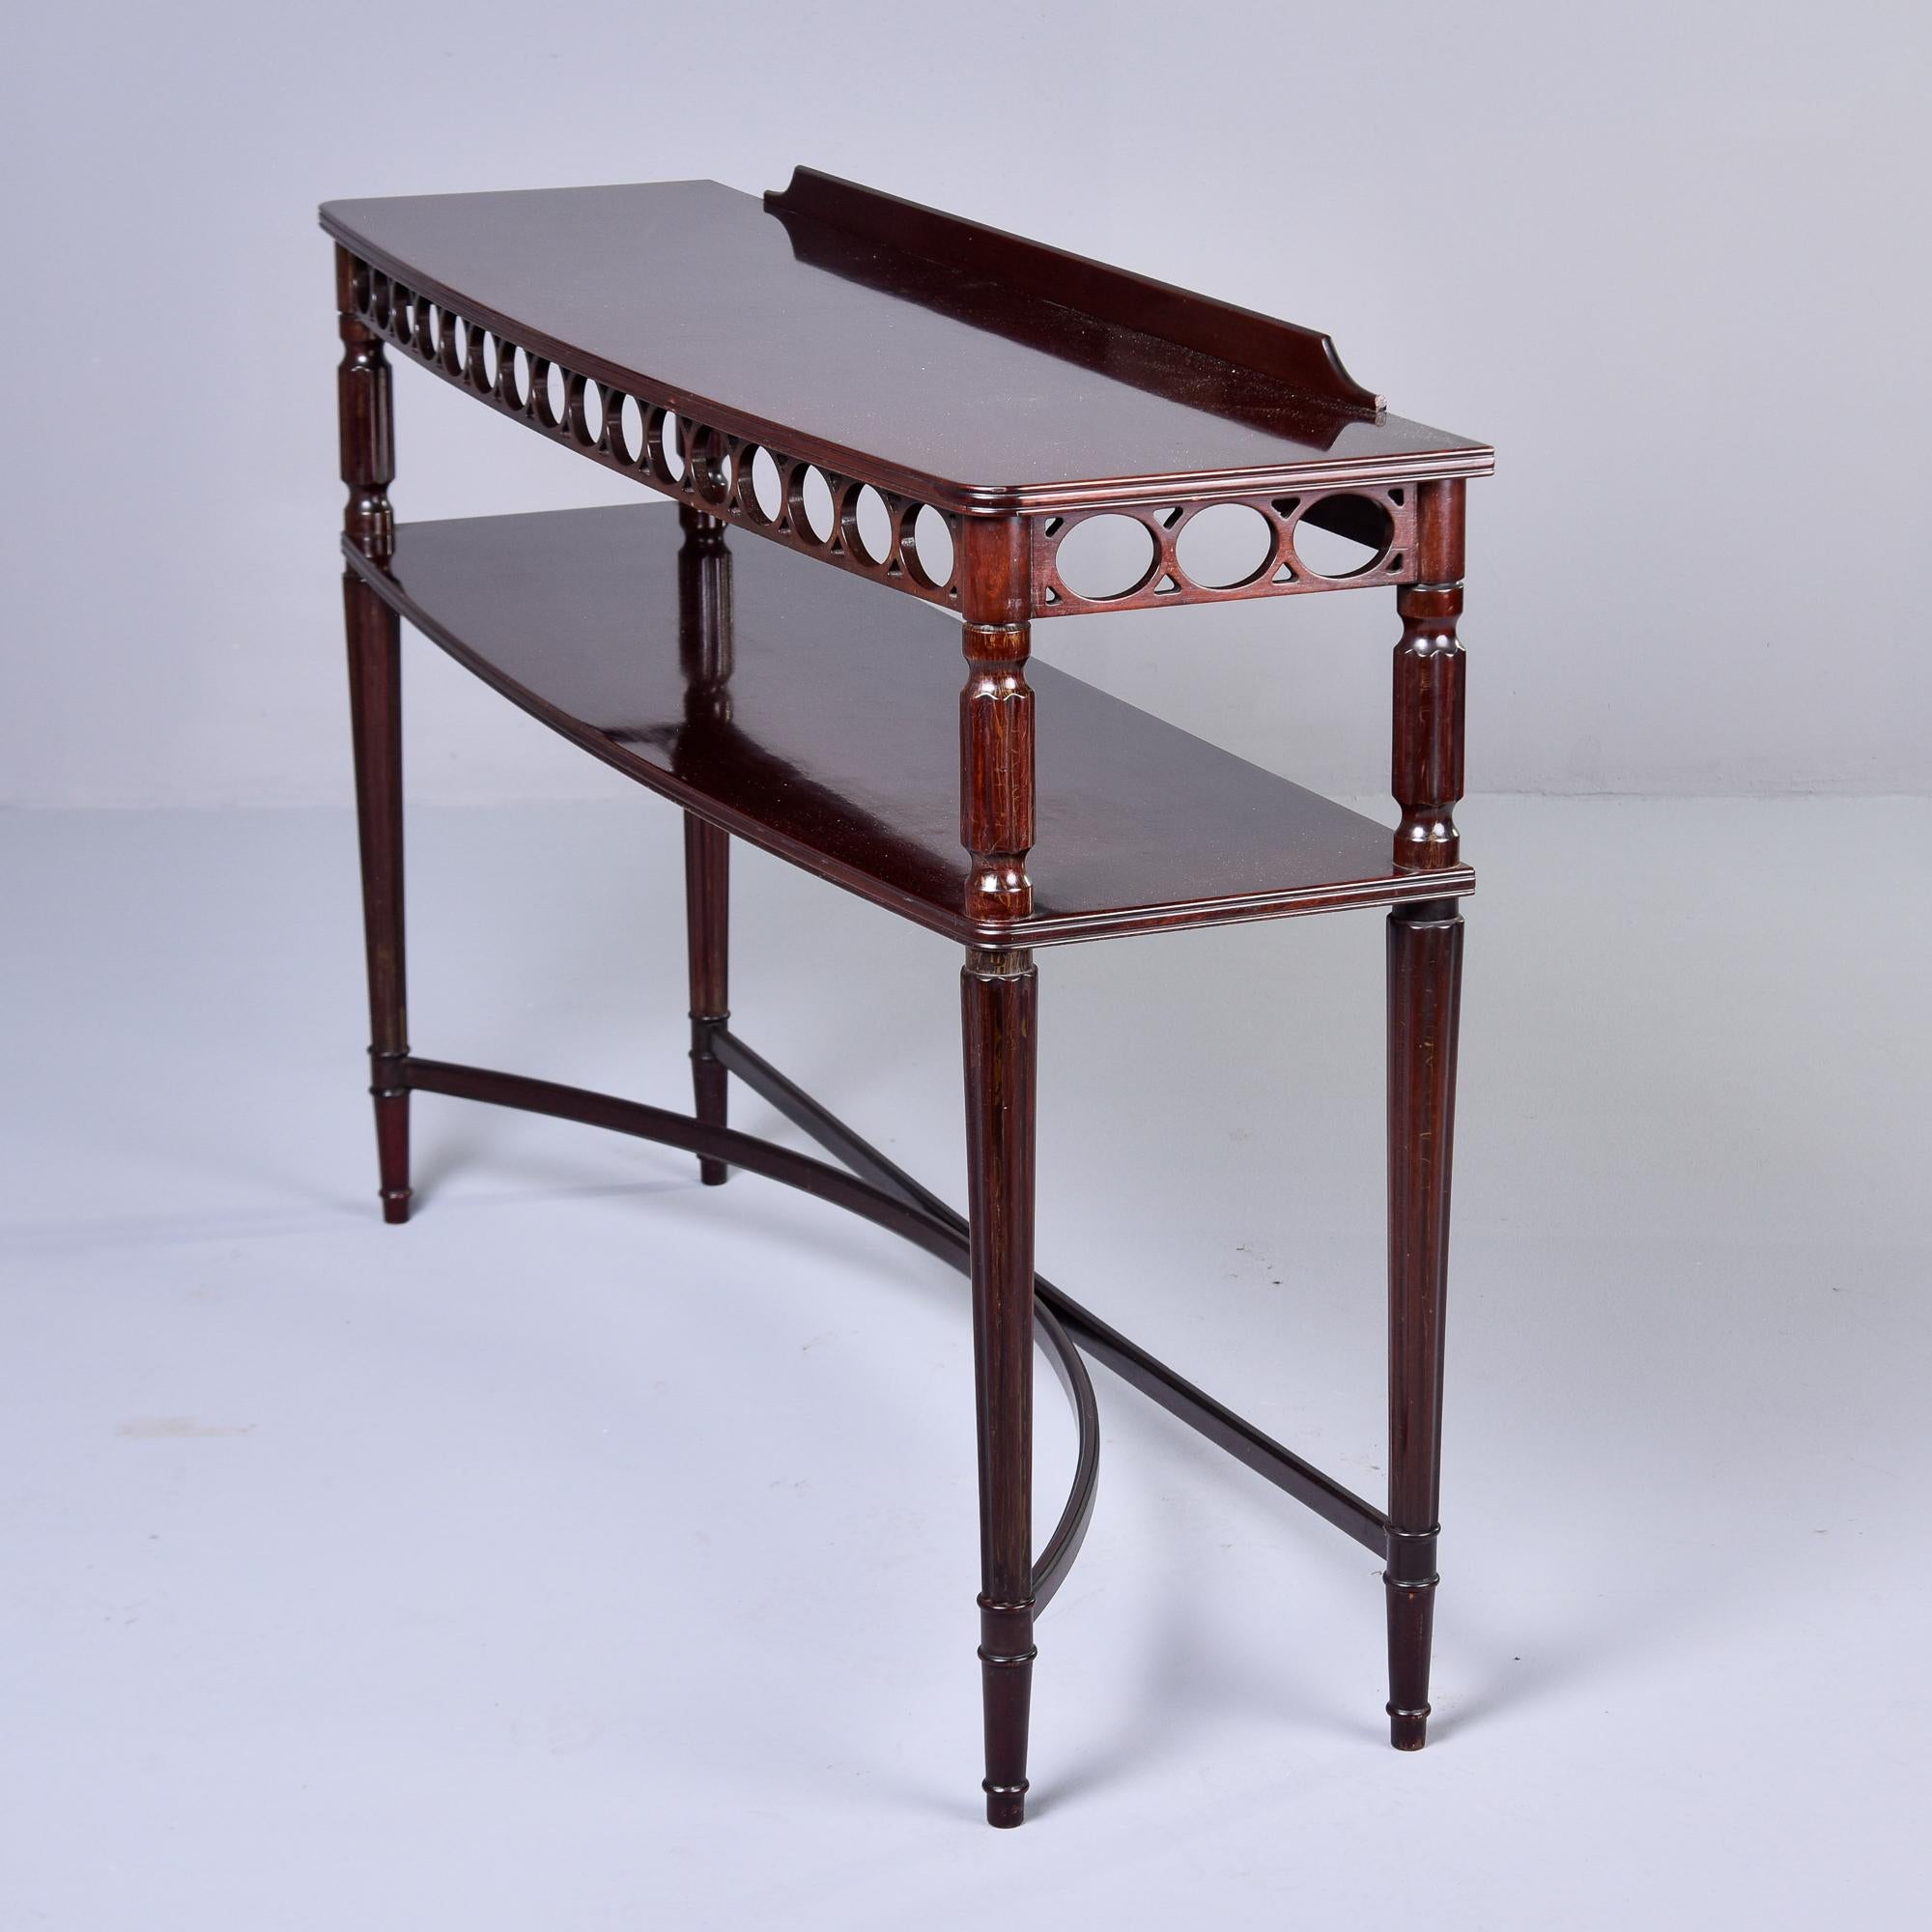 Vintage English Two Tier Mahogany Console with Open Work Apron In Good Condition For Sale In Troy, MI